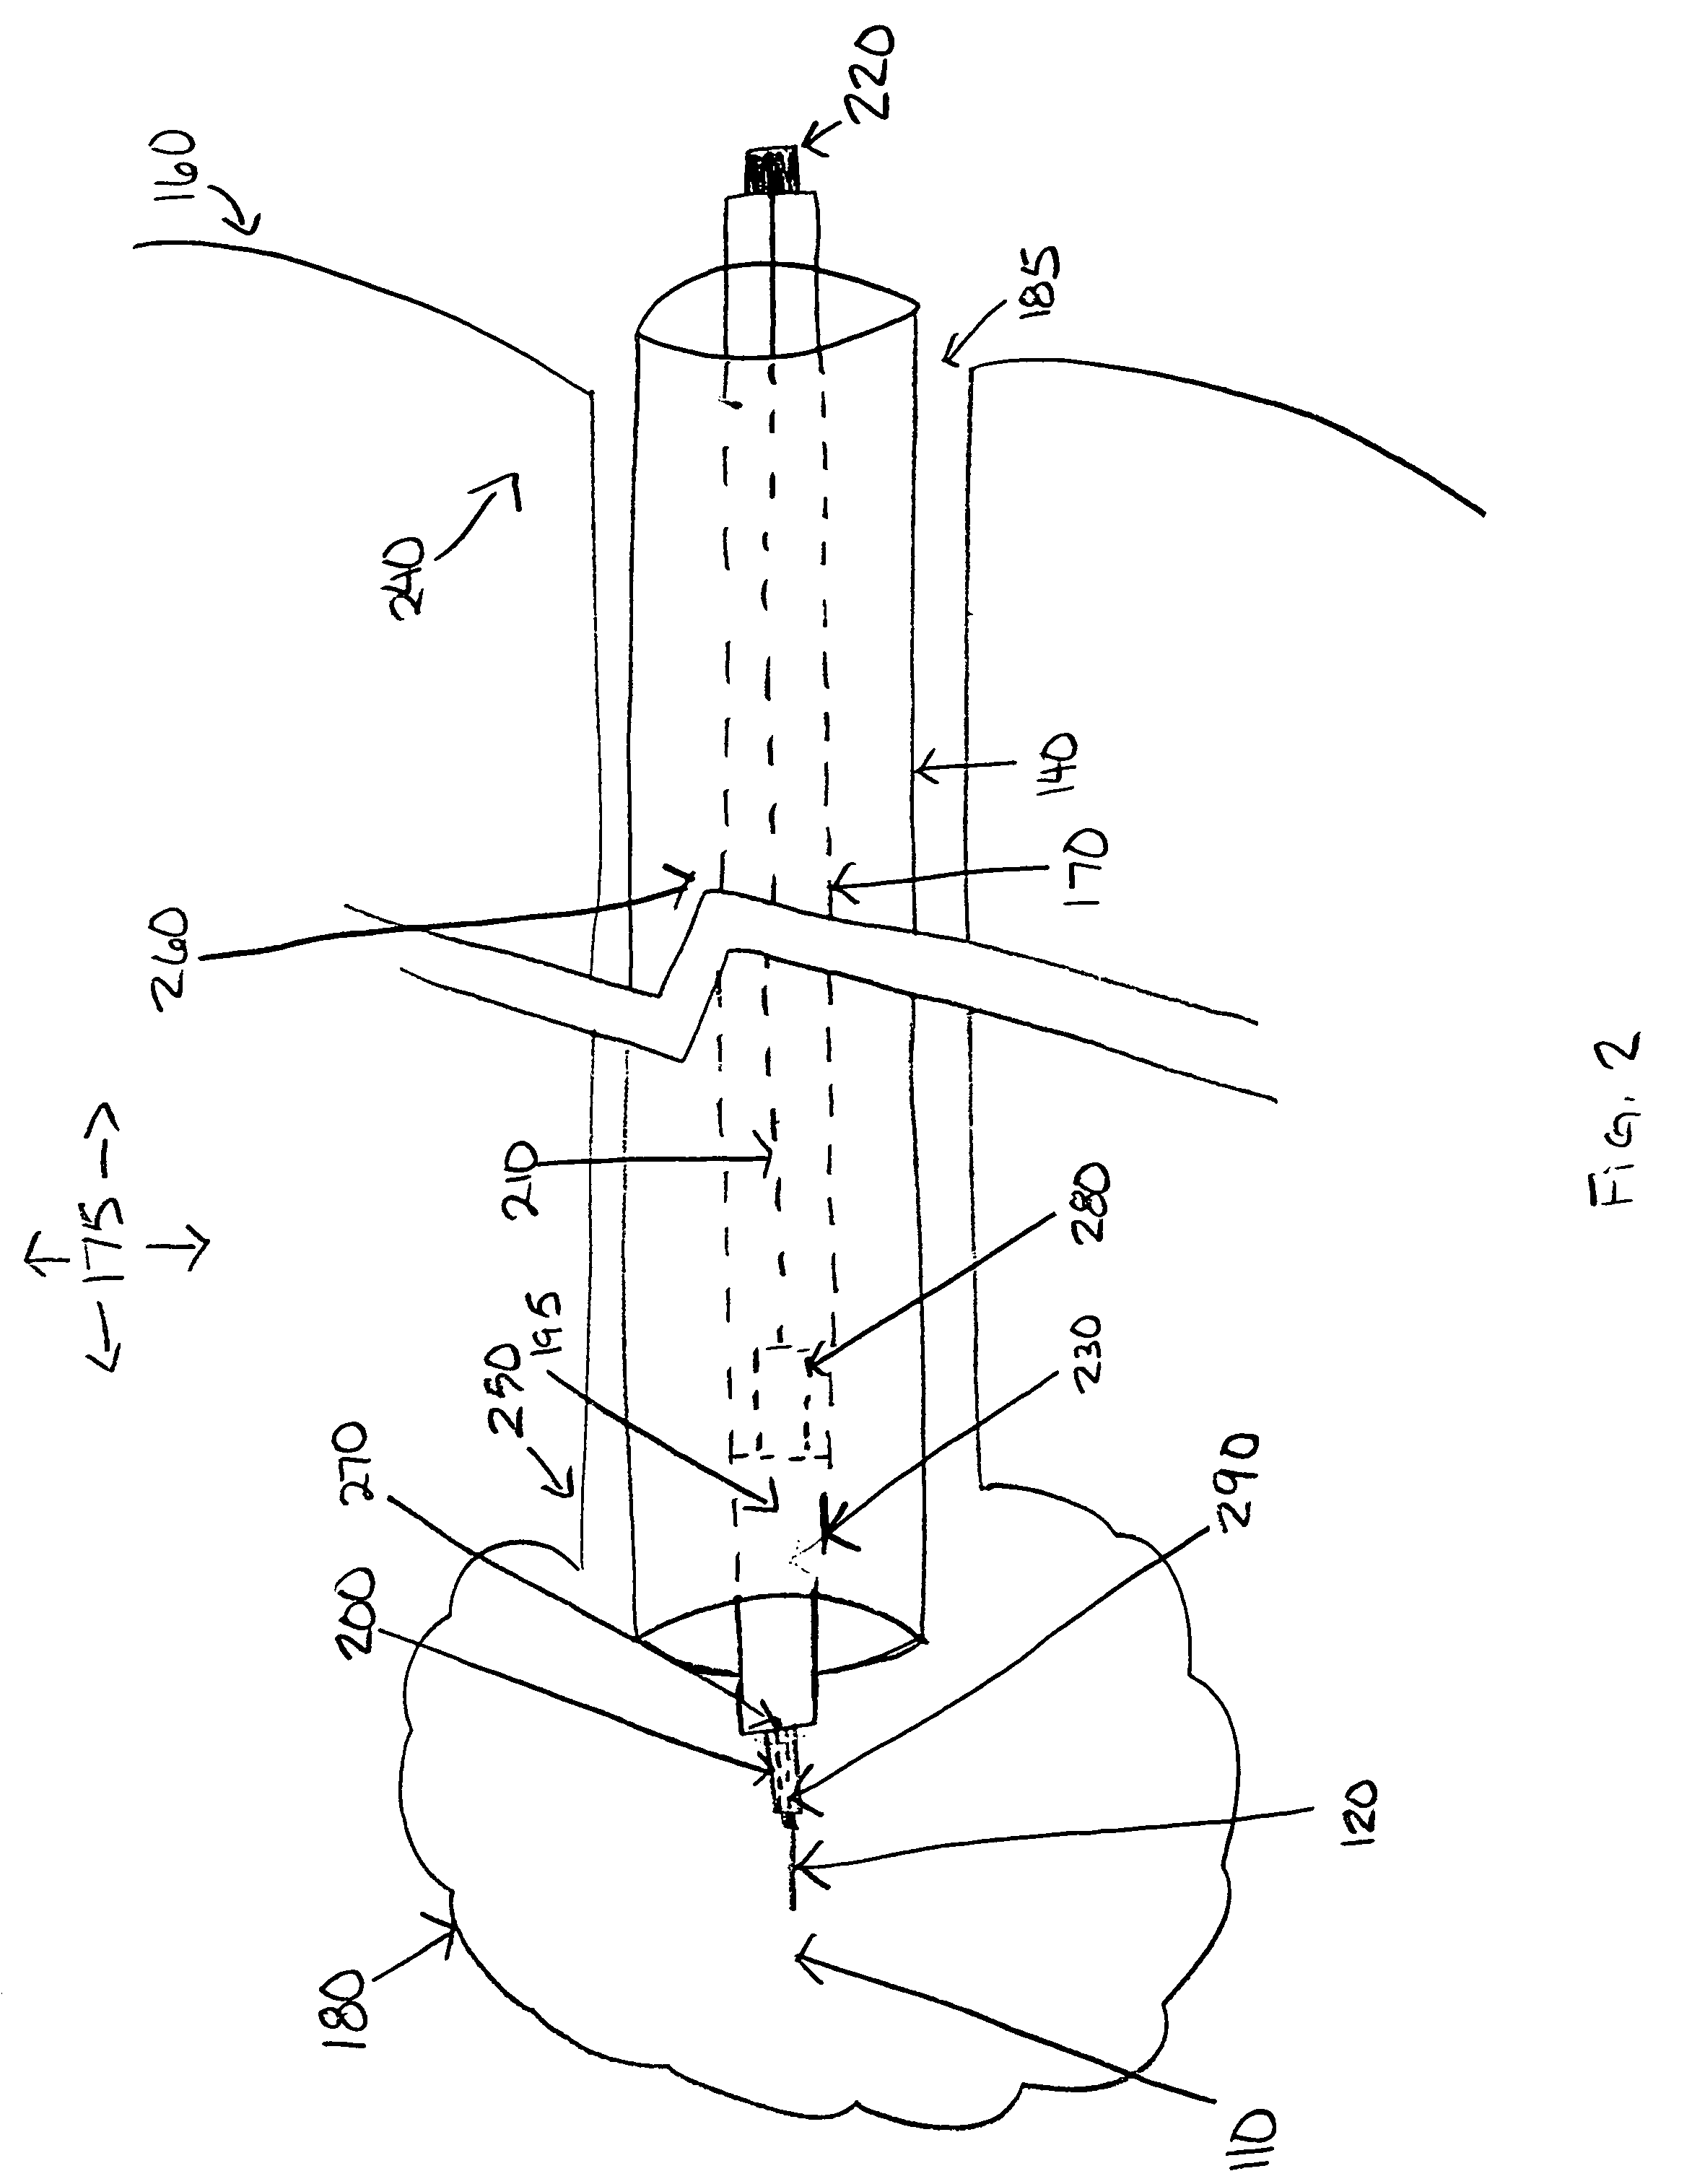 Apparatus for delivery of controlled doses of therapeutic drugs in endoluminal procedures